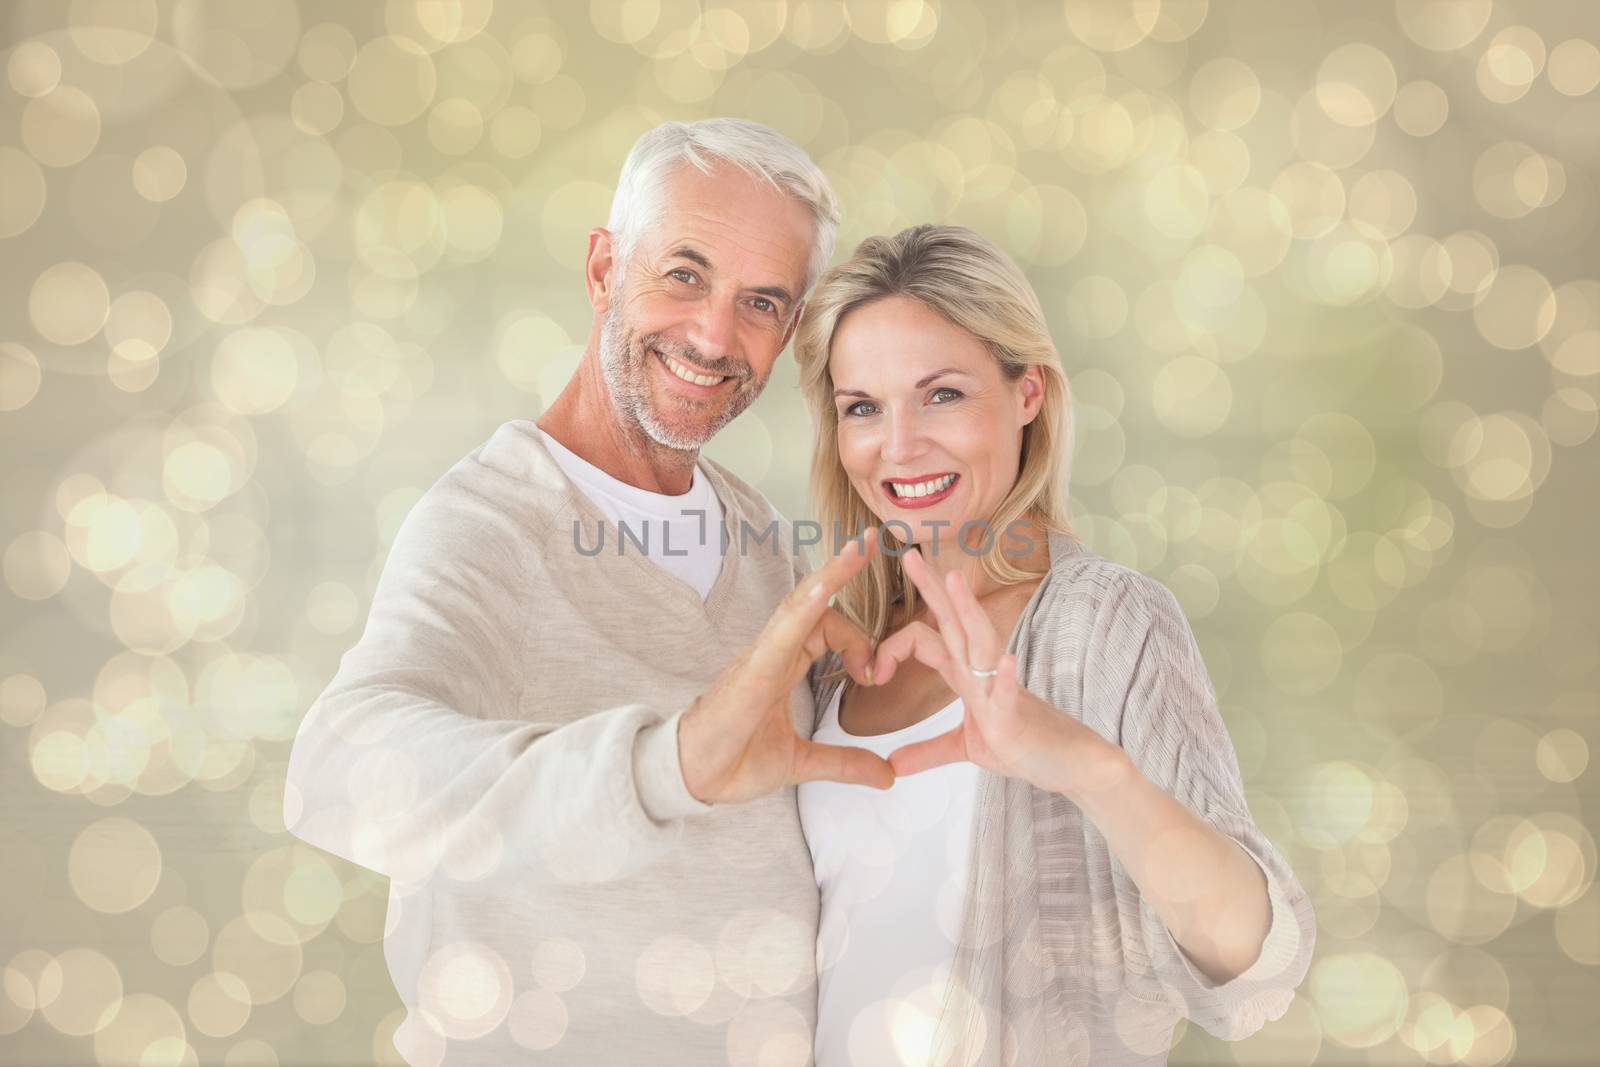 Composite image of happy couple forming heart shape with hands by Wavebreakmedia